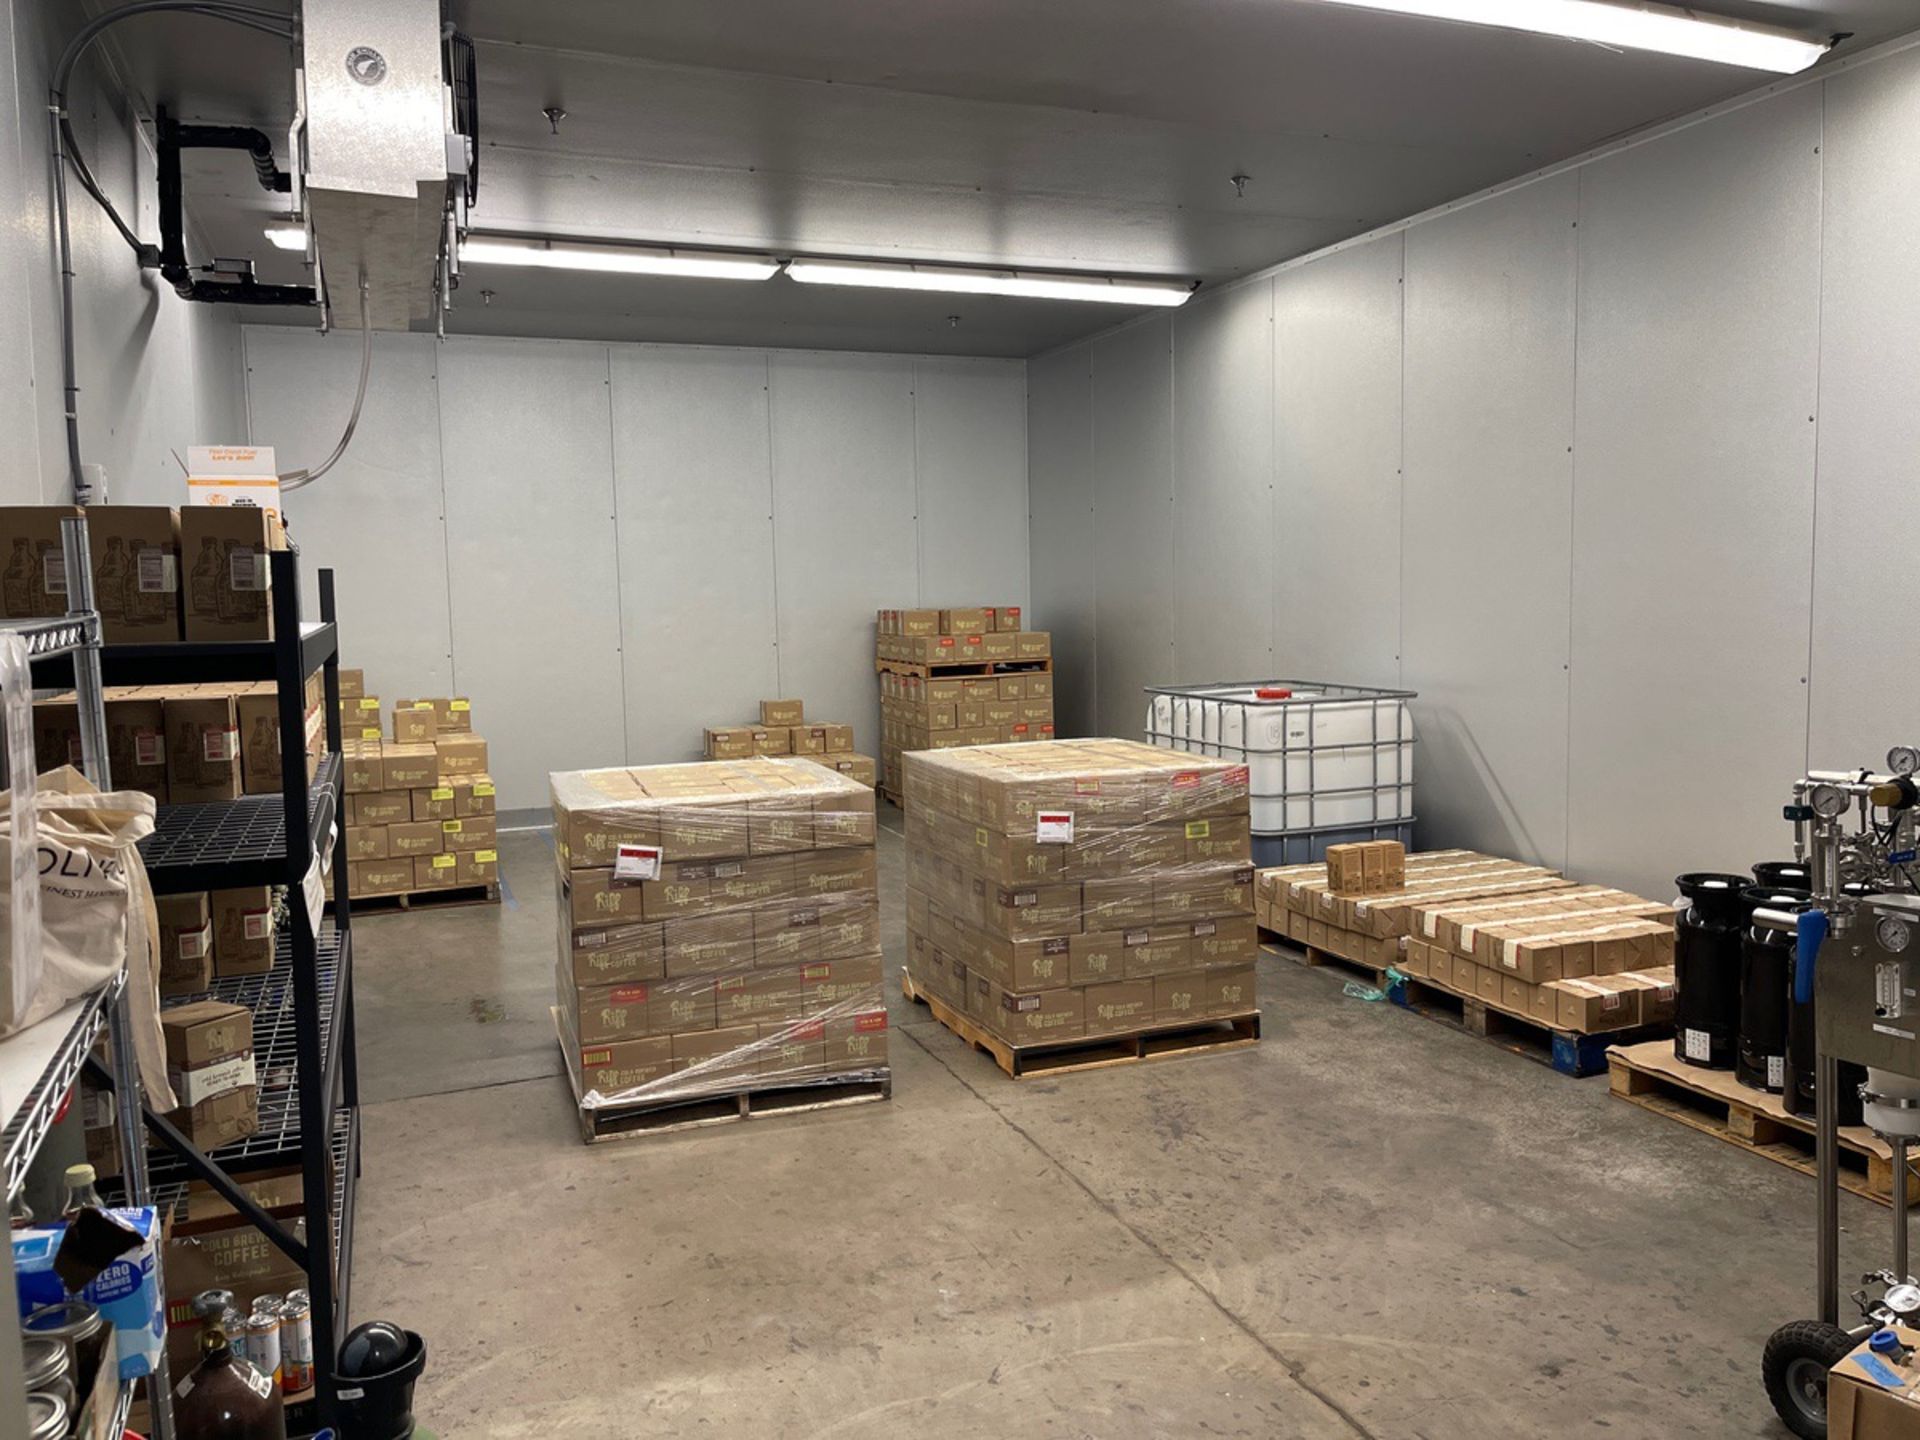 2018 Thermal Supply Cold Room with Glycol Chilled Fans, 20' x 35' x 12', LED Lights | Rig Fee $7780 - Bild 4 aus 7